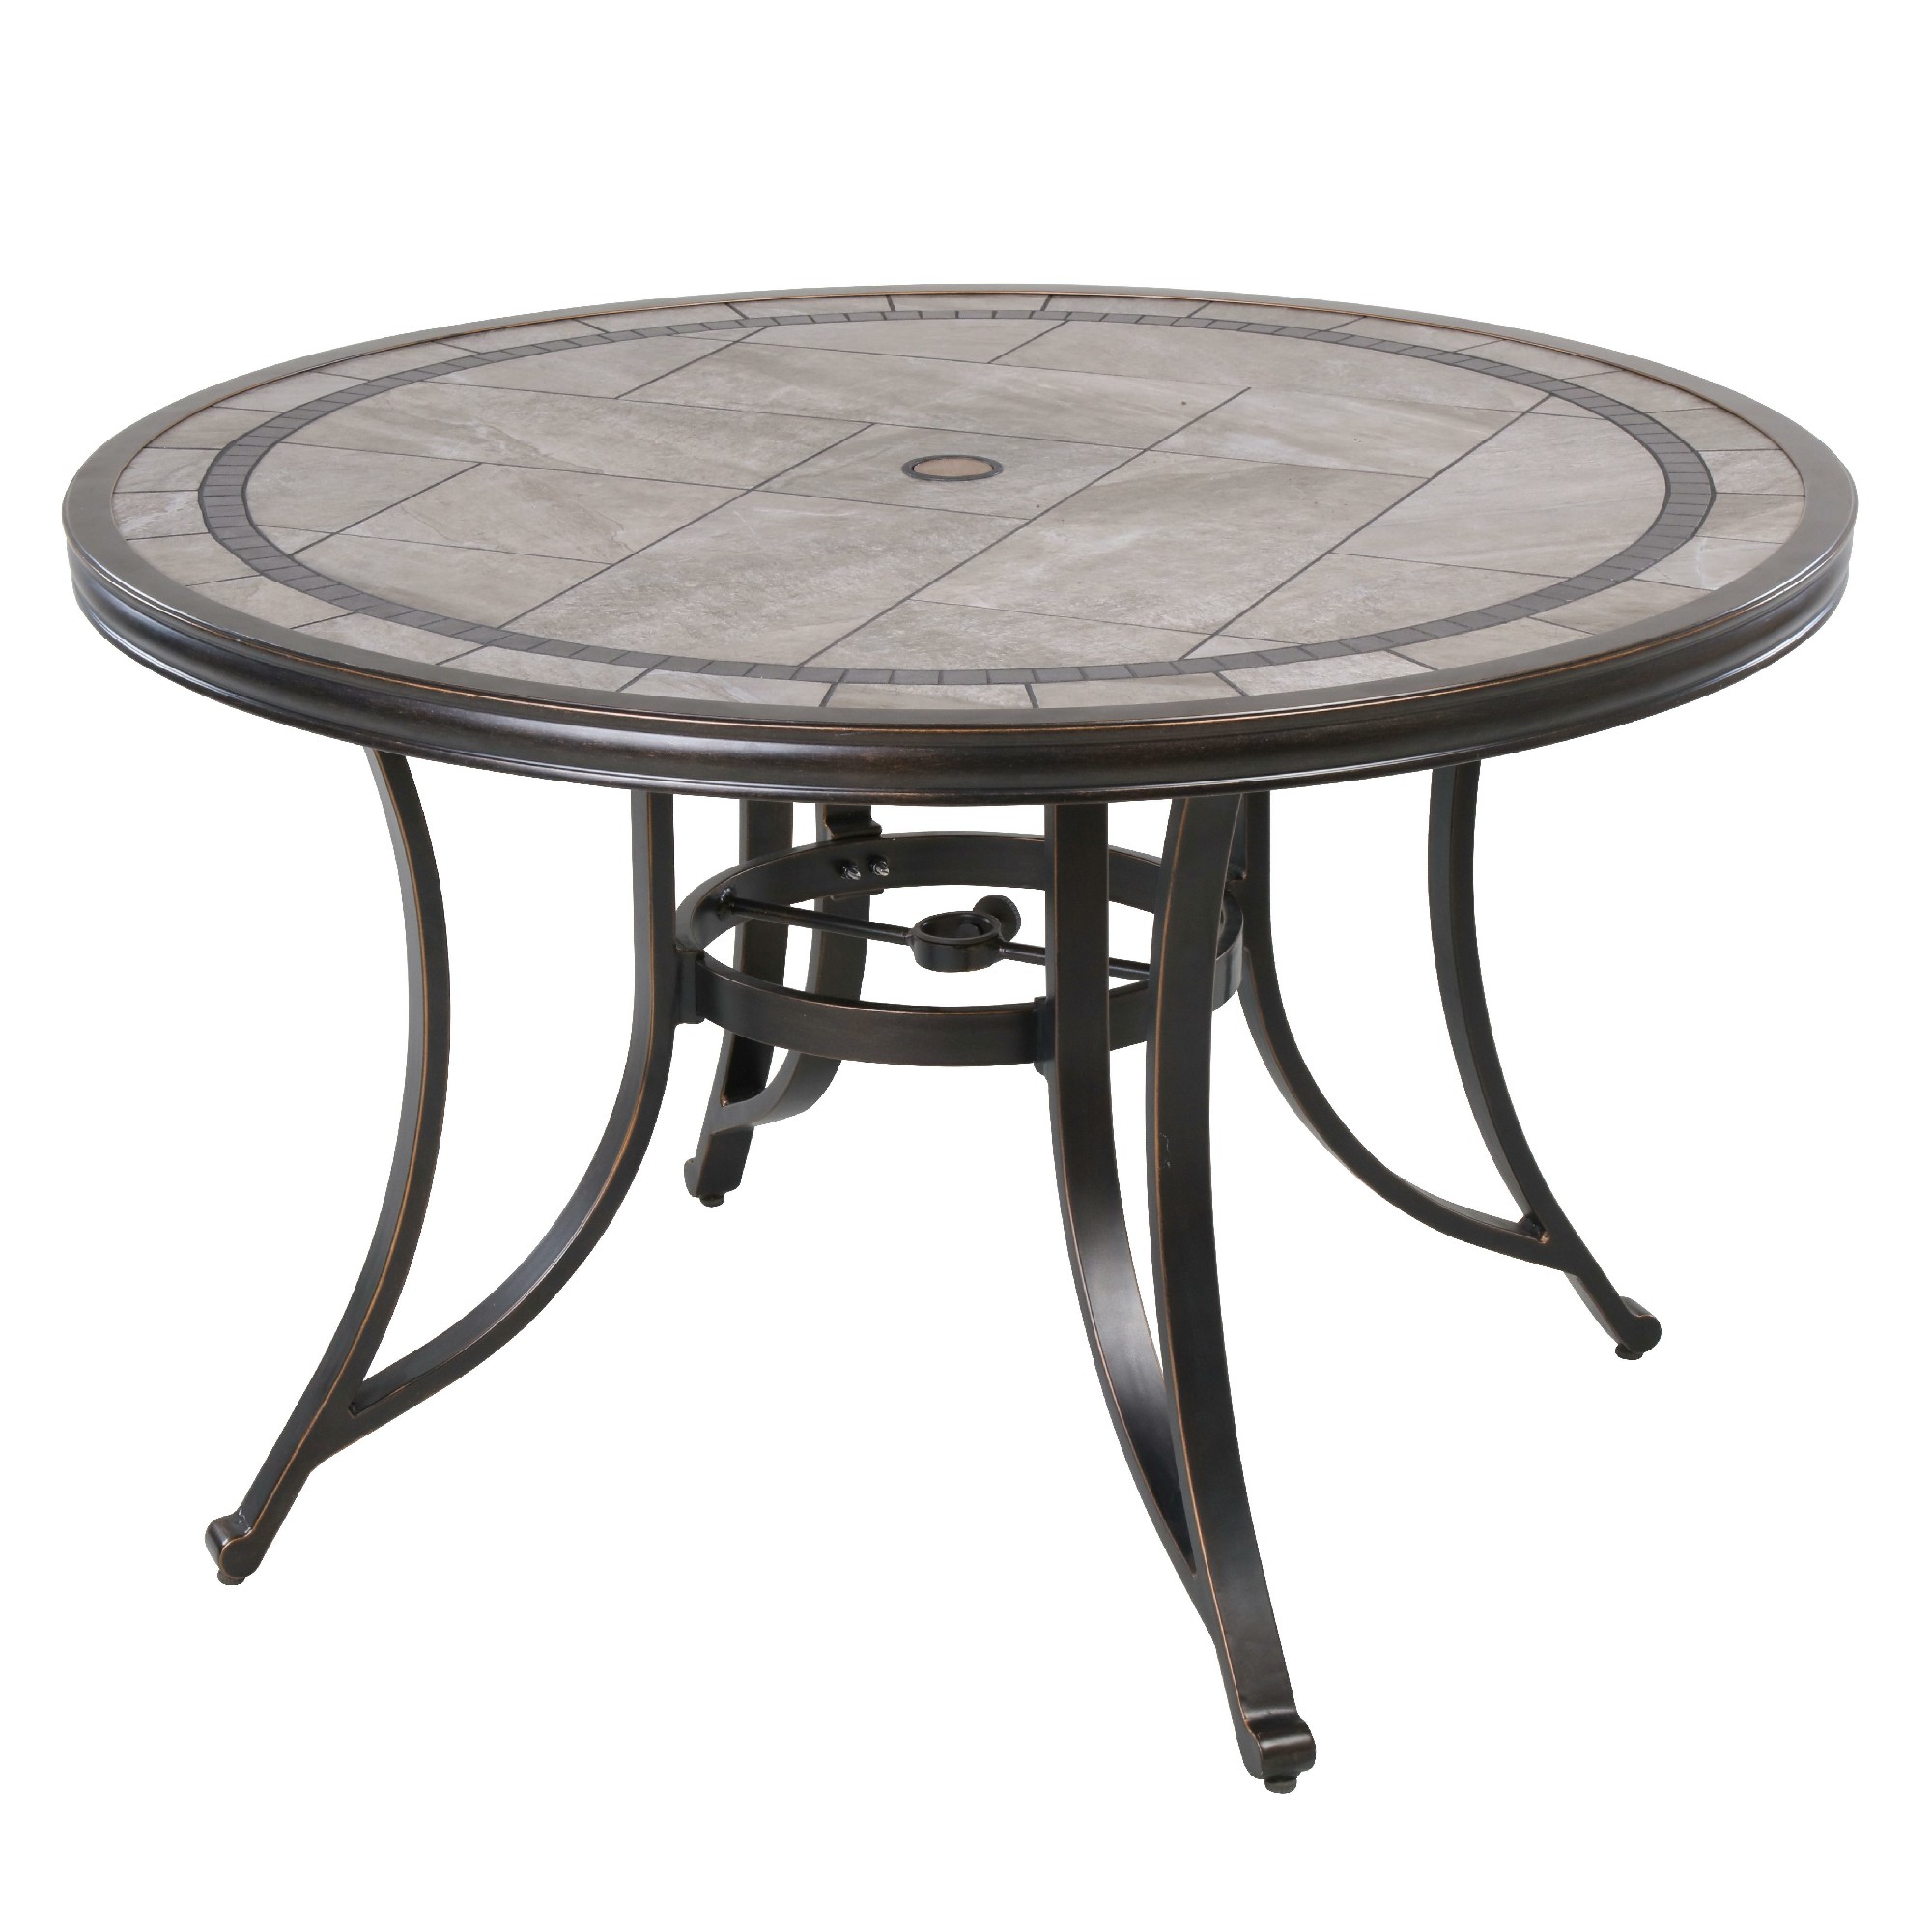 Mondawe Round Aluminum 28 in. Outdoor Patio Tile-Top Dining Table with 2.36 in. Umbrella Hole